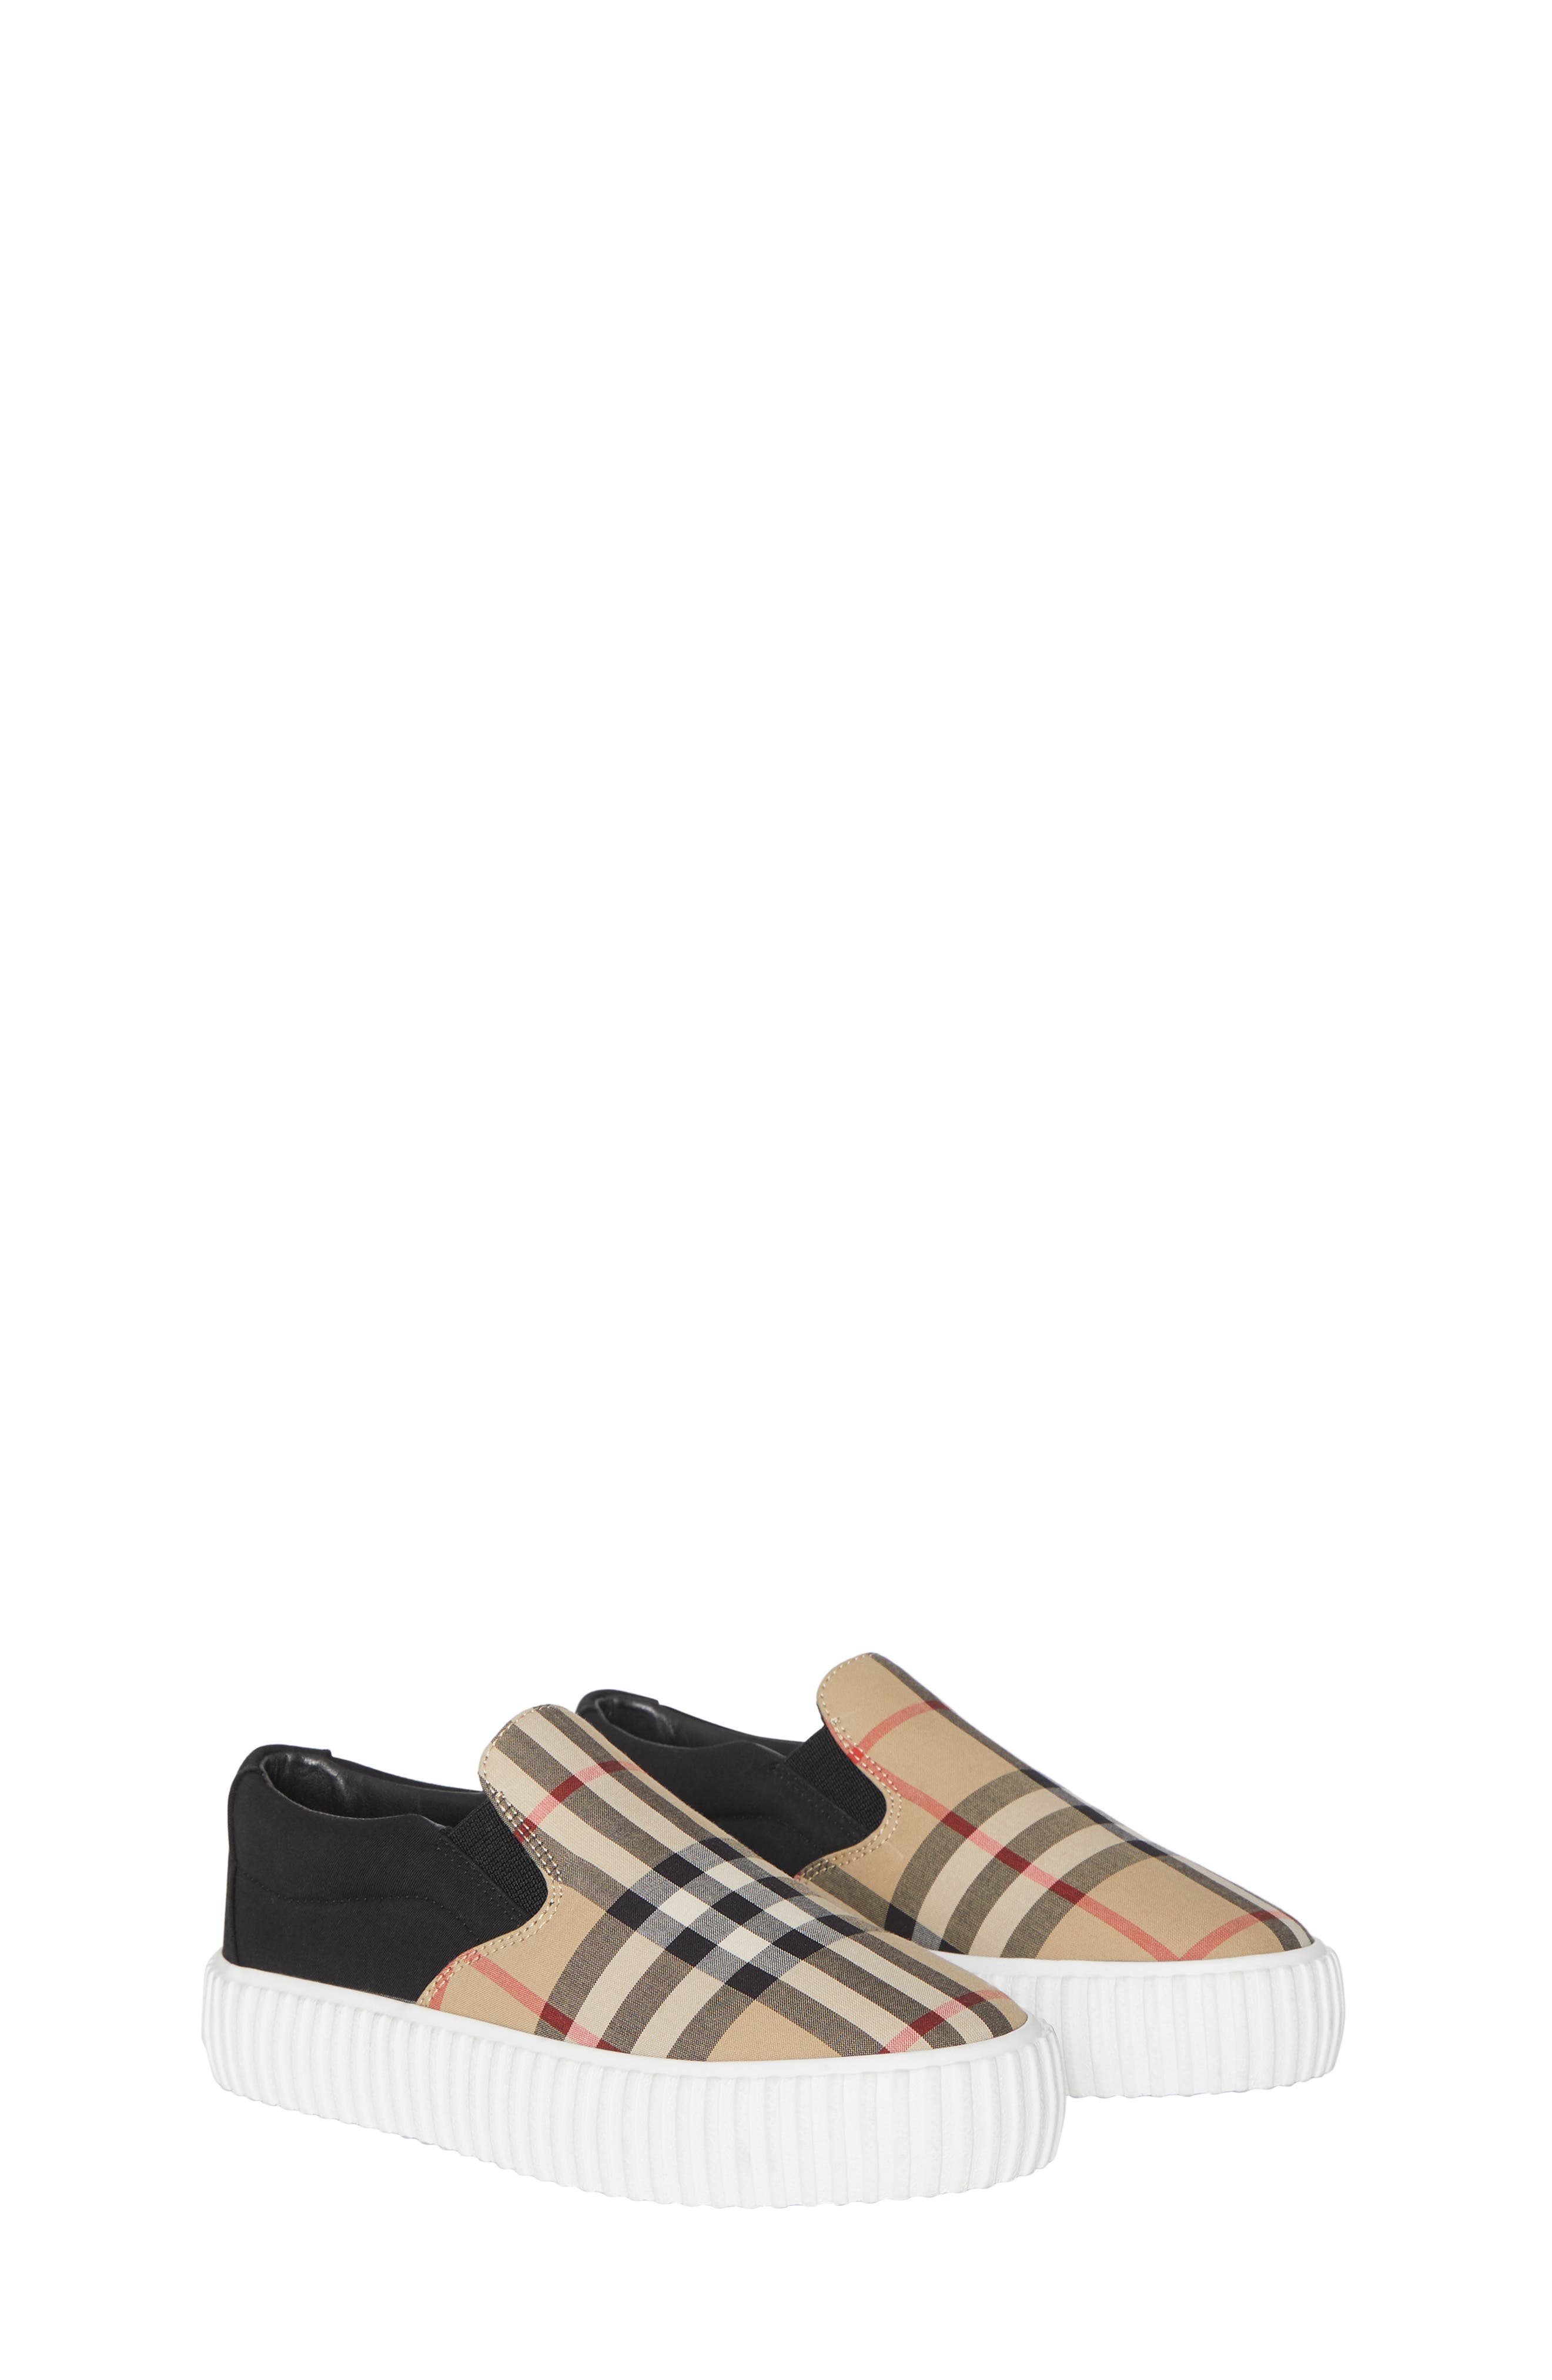 Kids' Burberry Shoes | Nordstrom